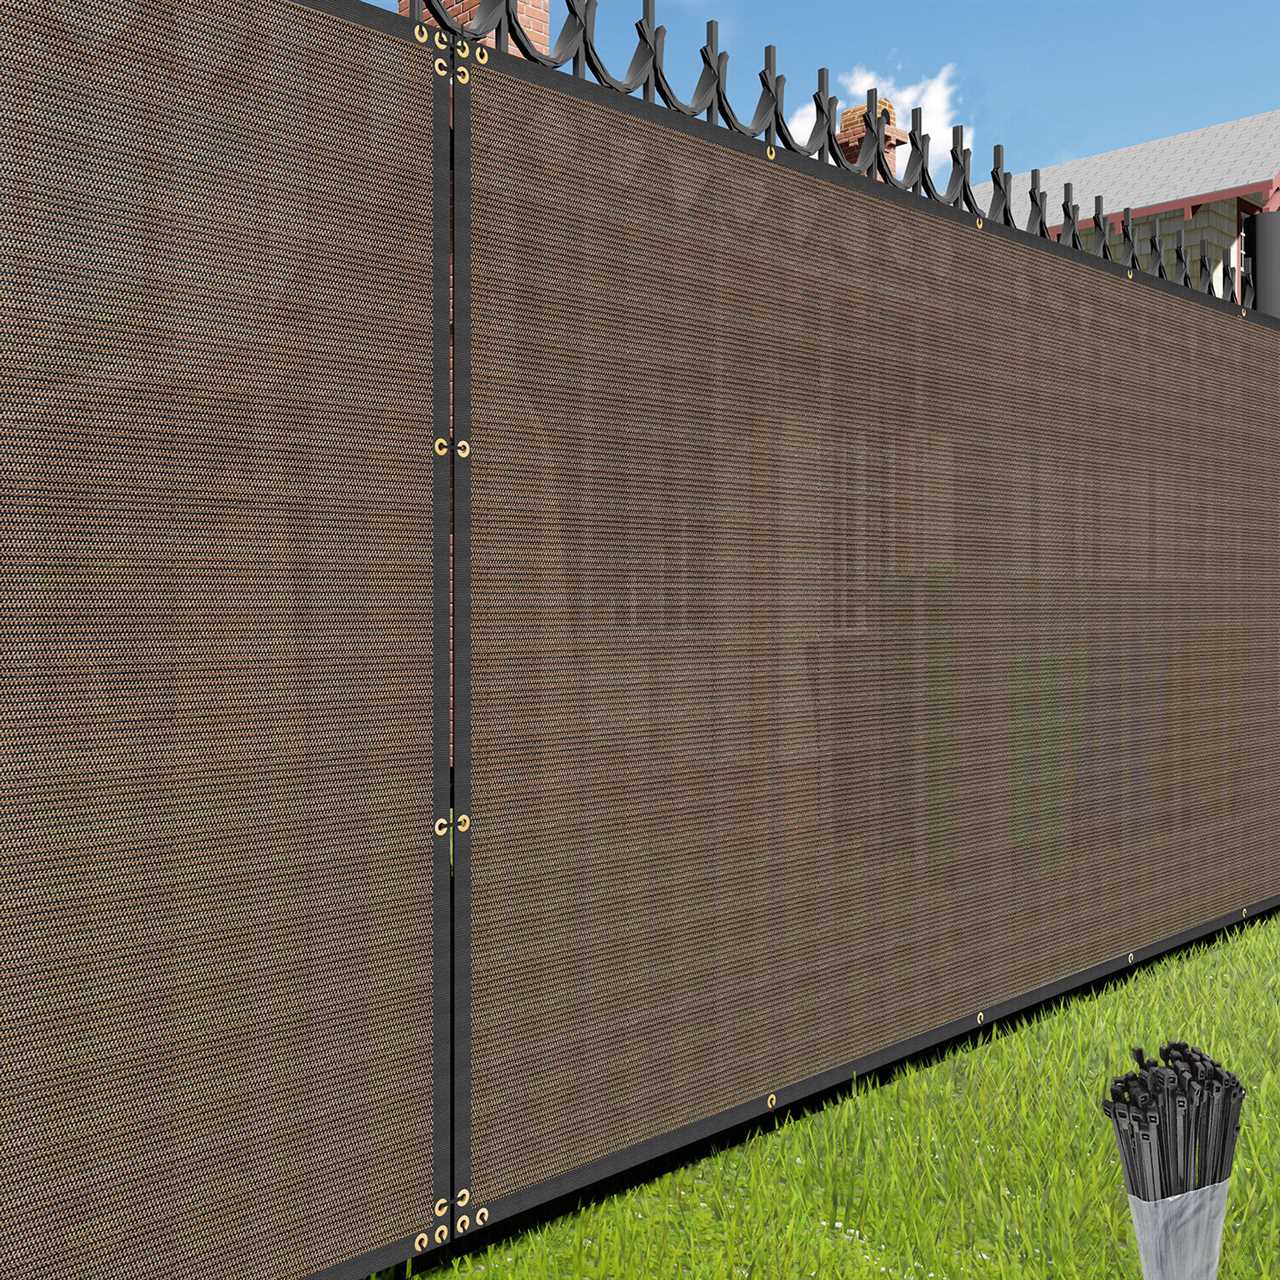 Enhance Your Outdoor Privacy with a Chain Link Fence Privacy Screen